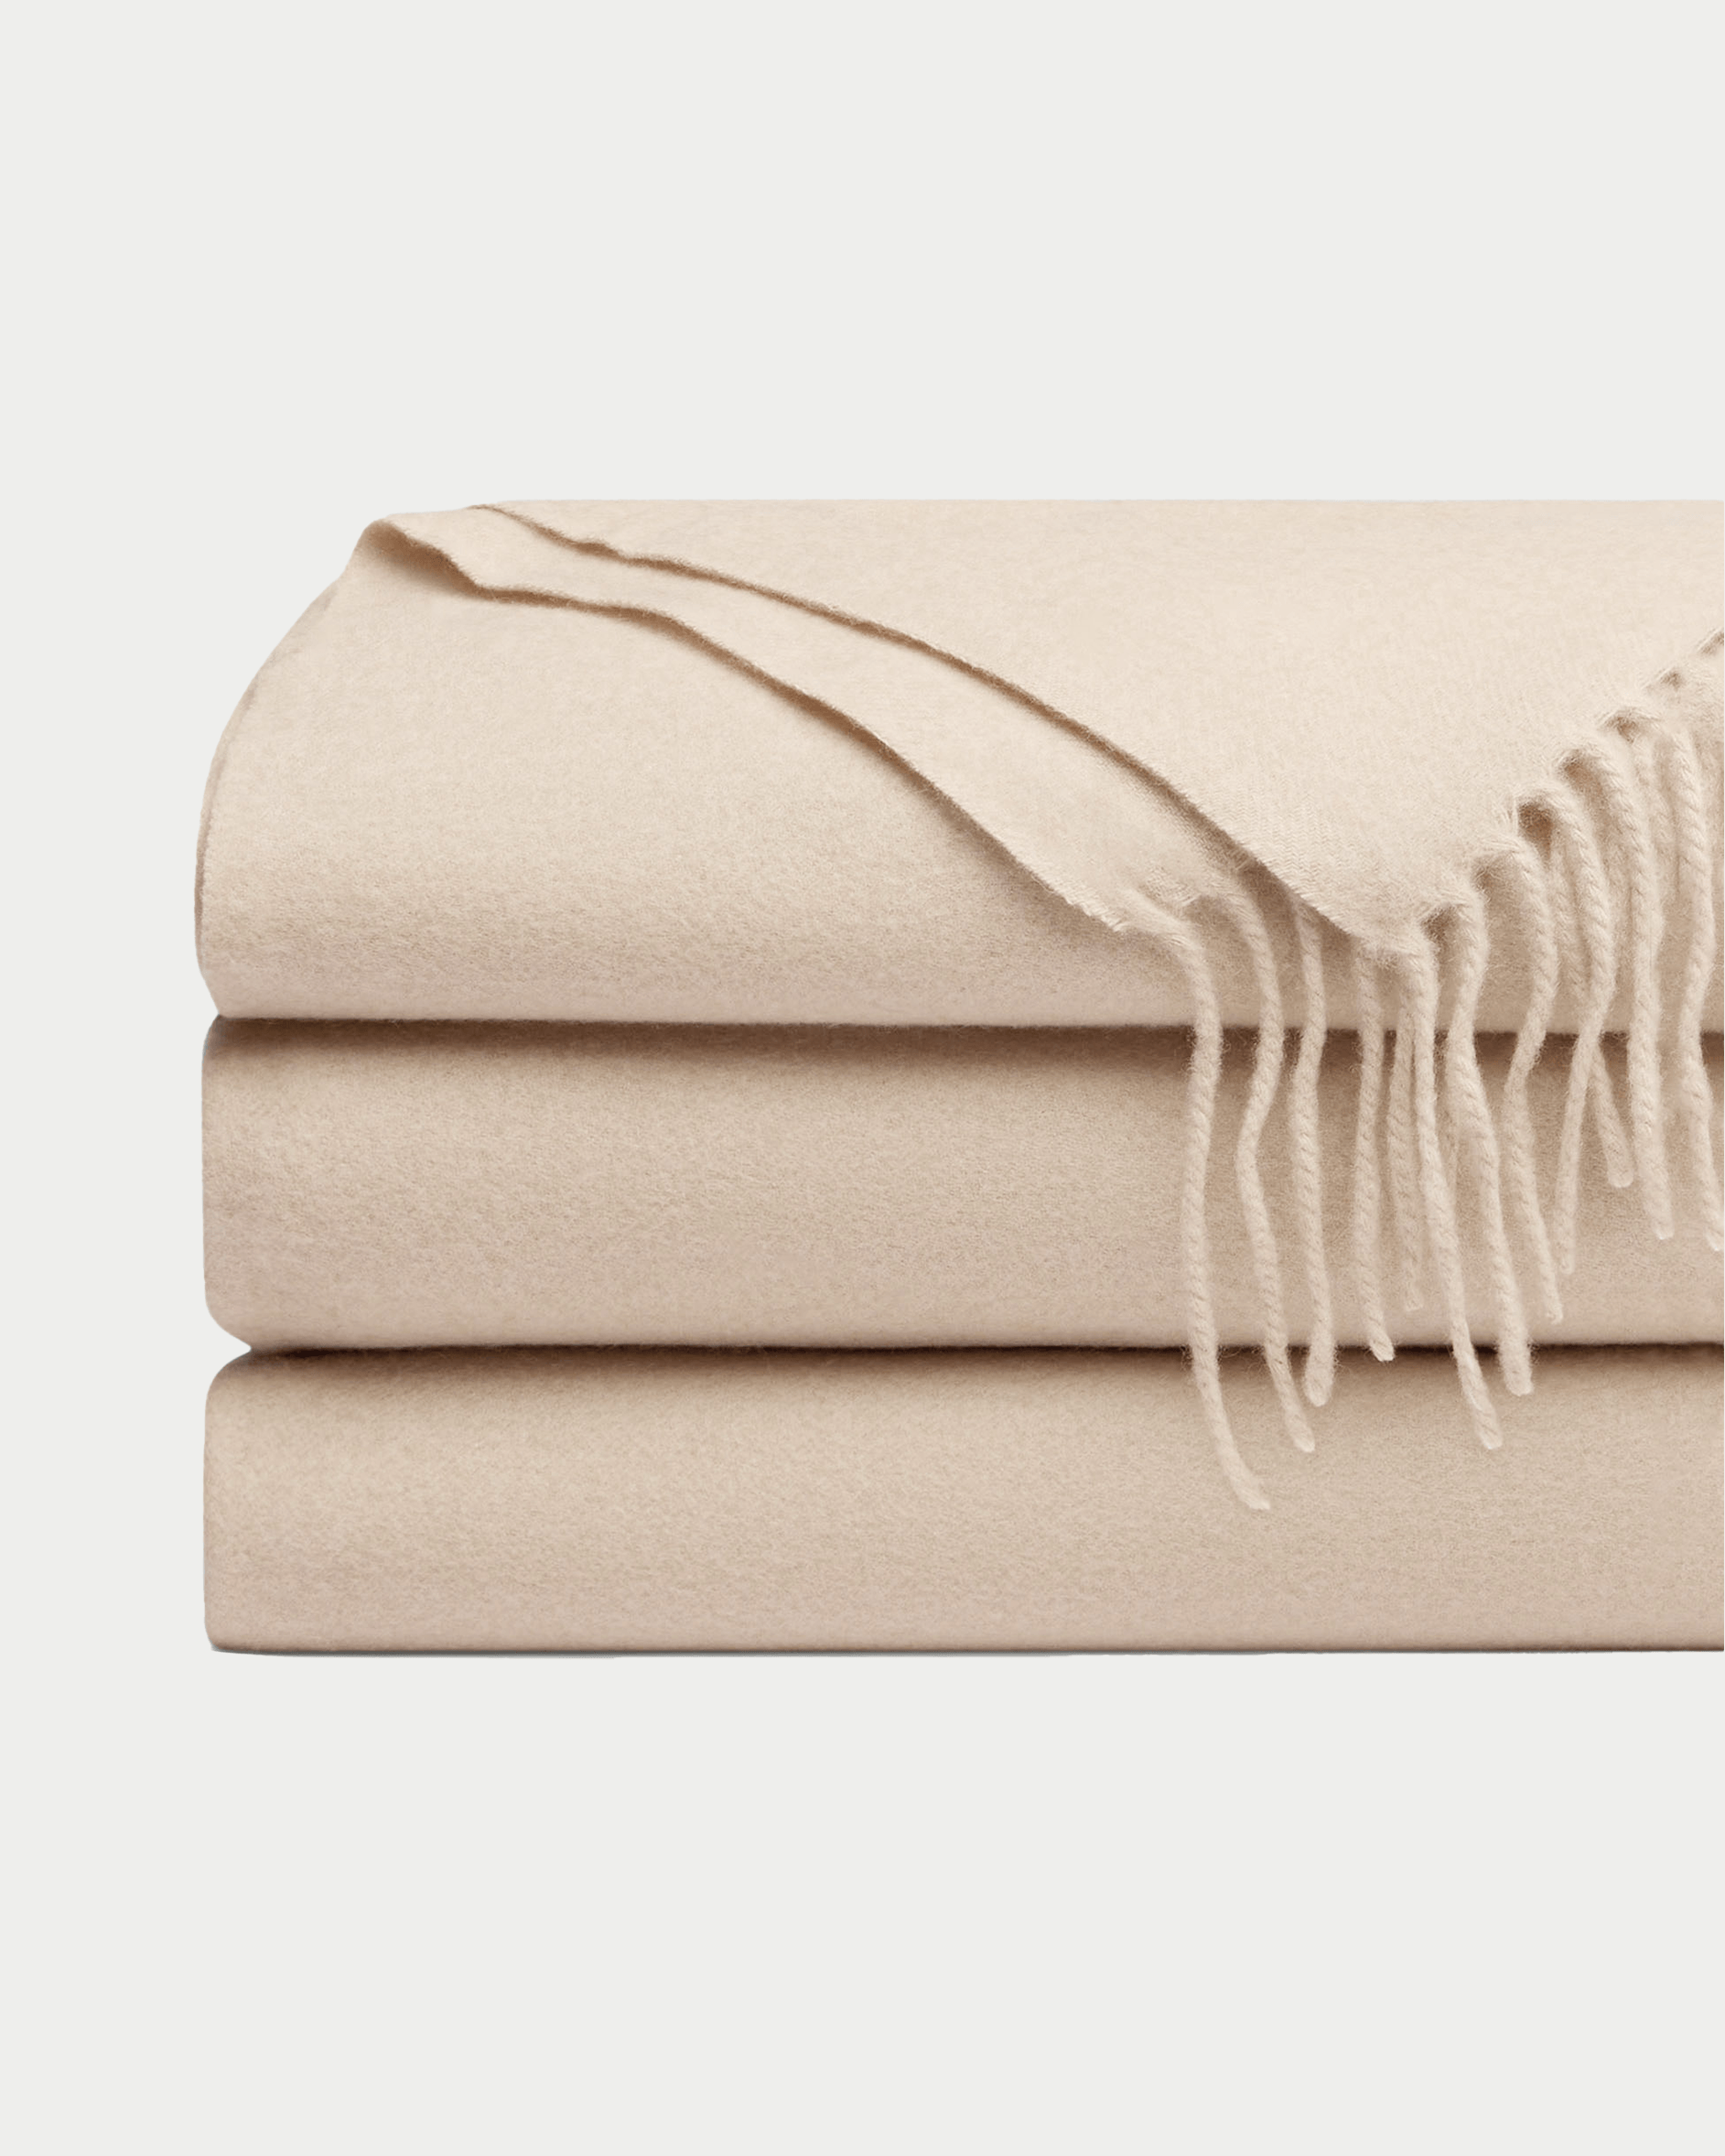 Dune cashmere tassel throw folded with white background |Color:Dune